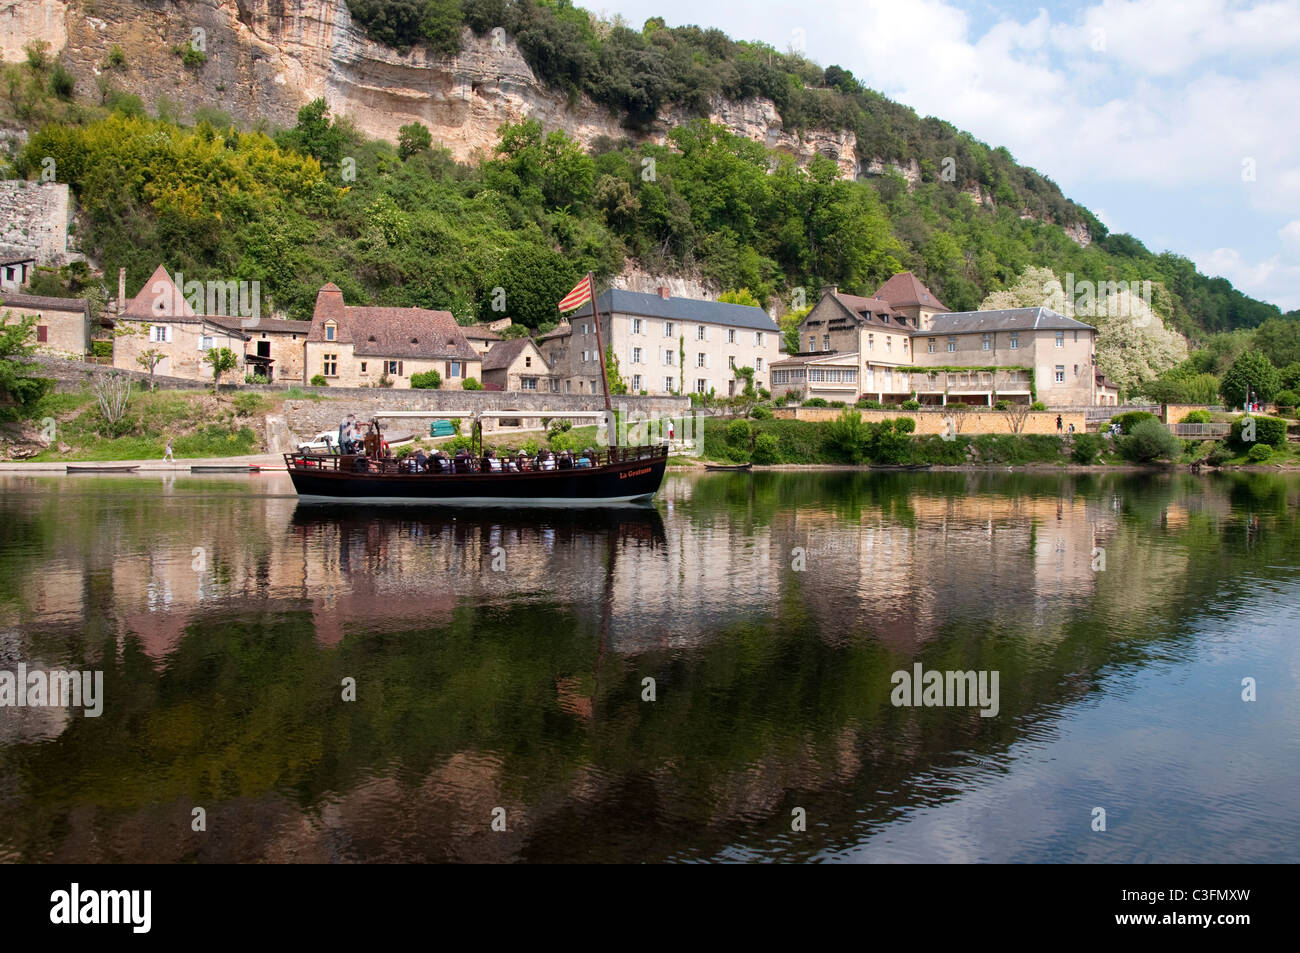 A boat trip on the river at Beynac, Dordogne France Stock Photo